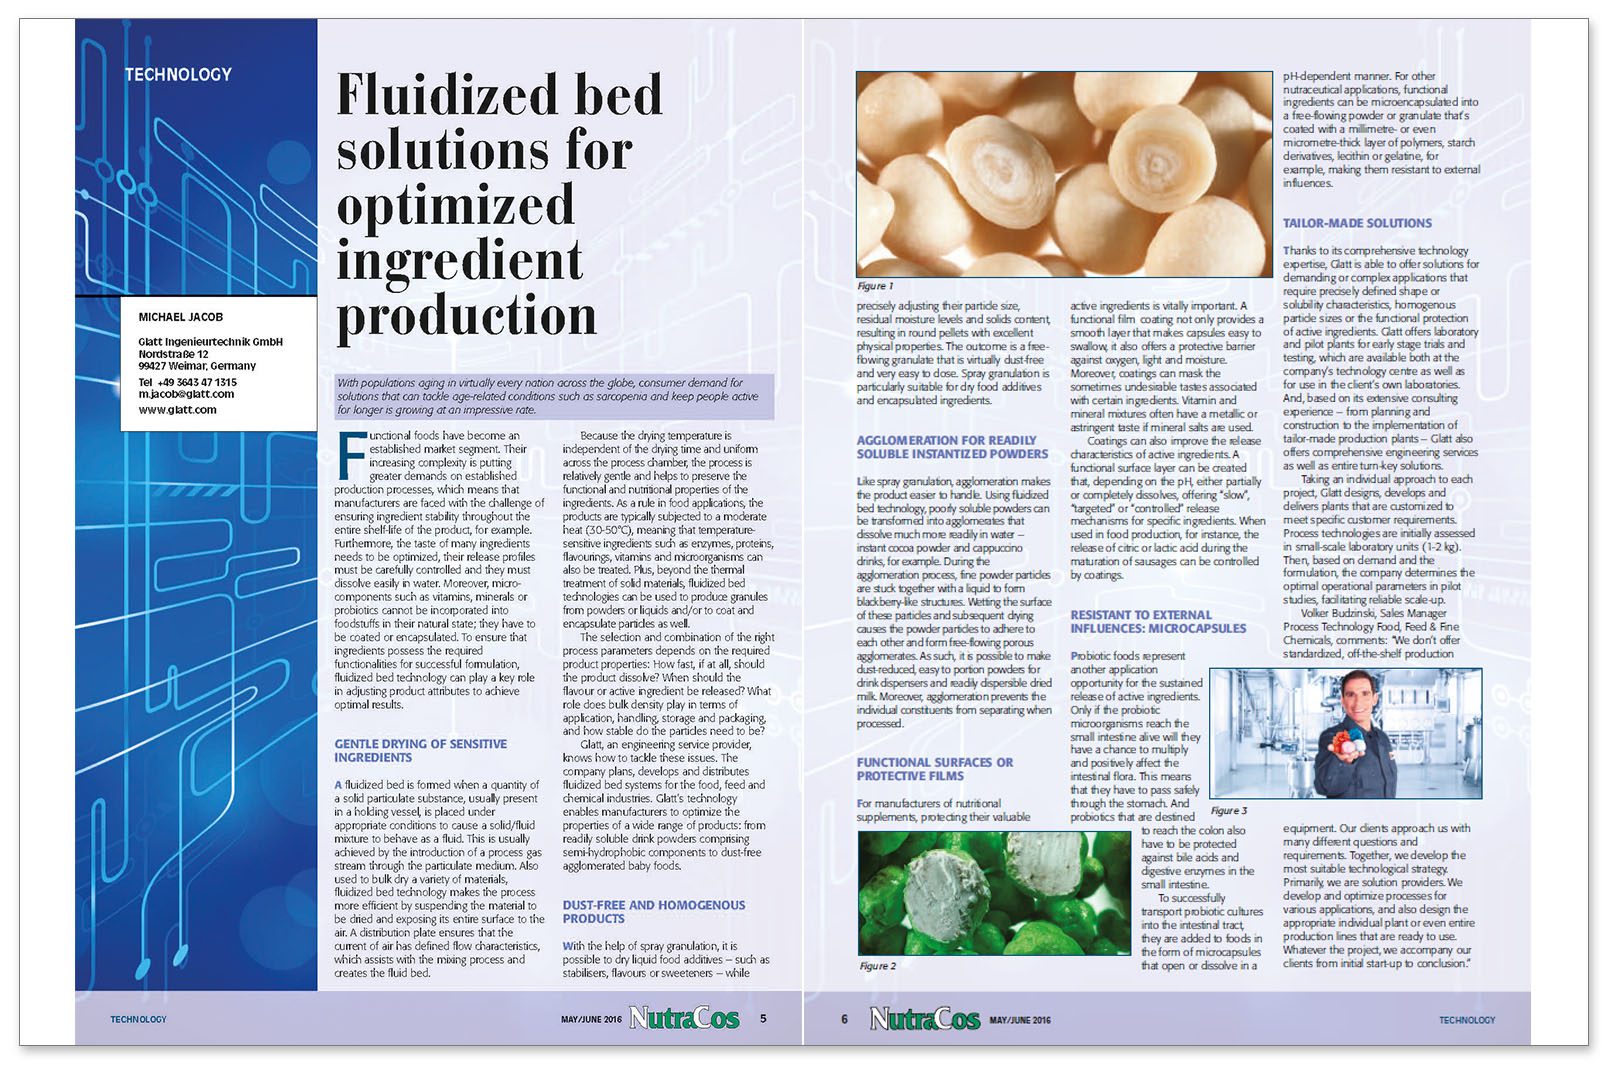 Glatt technical article on 'Fluidized bed solutions for optimized ingredient production', published in the trade magazine 'NutraCos', issue 03/2016, B5 S.r.l.